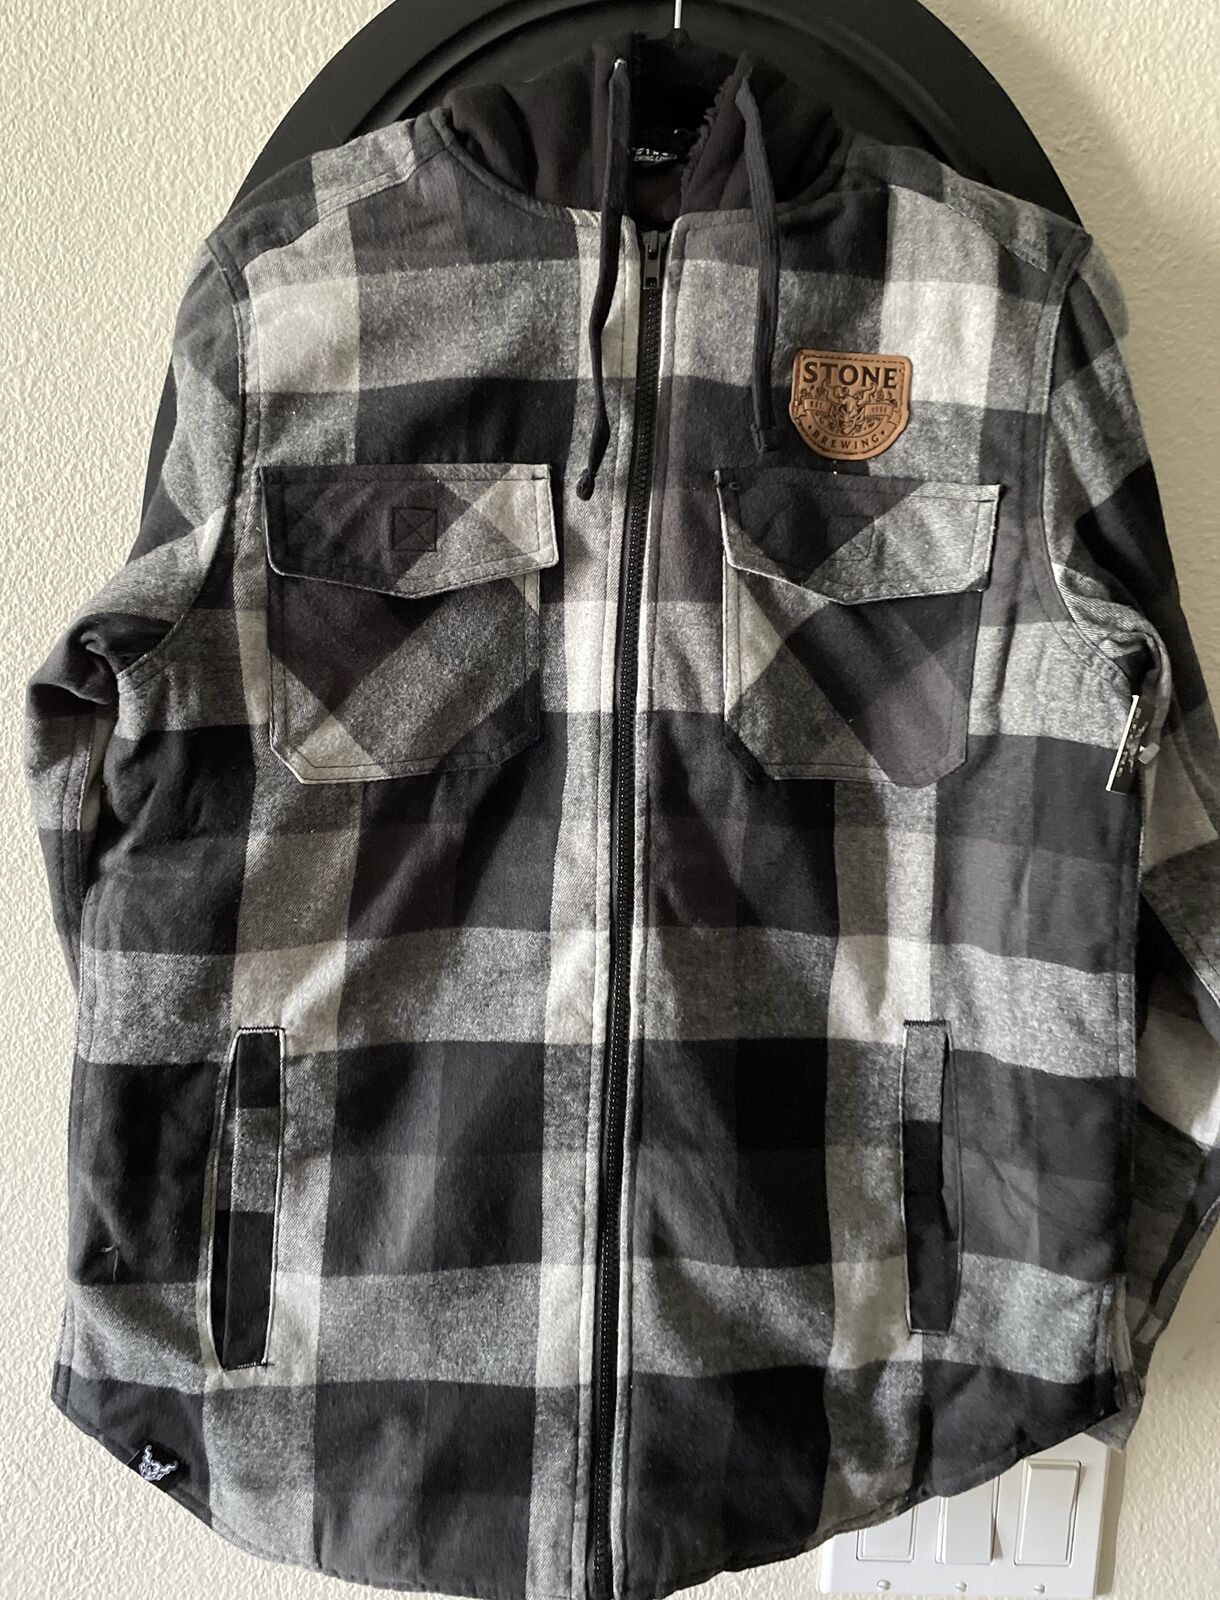 Flannel Jacket Stone Brewing Insulated with Hoodie 💥💥💥BRAND NEW💥💥💥